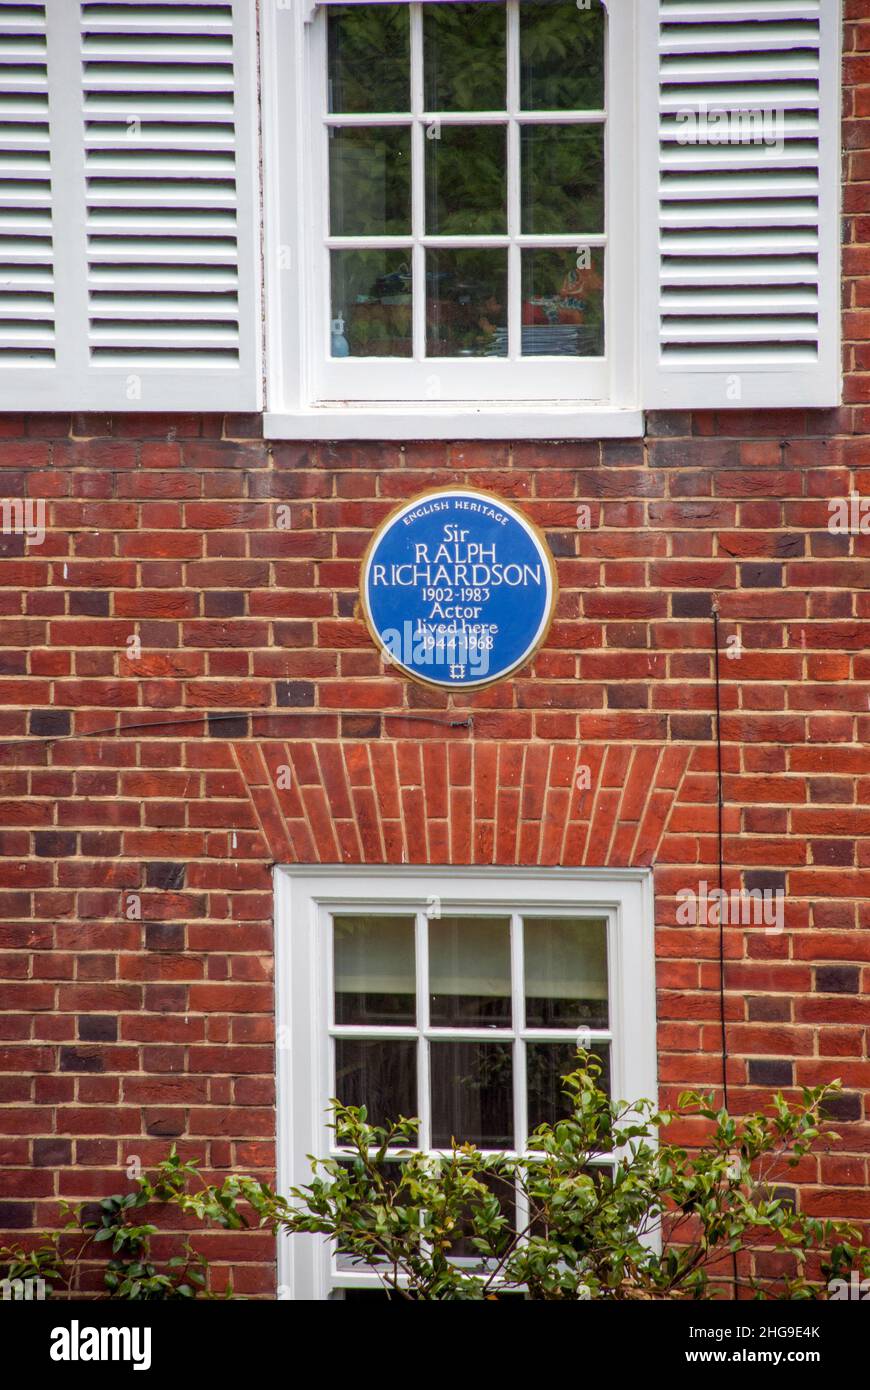 UK, England, London. Actor Sir Ralph Richardson lived here in Hampstead Garden Suburb. Blue Plaque shows dates 1944 - 1968. Stock Photo